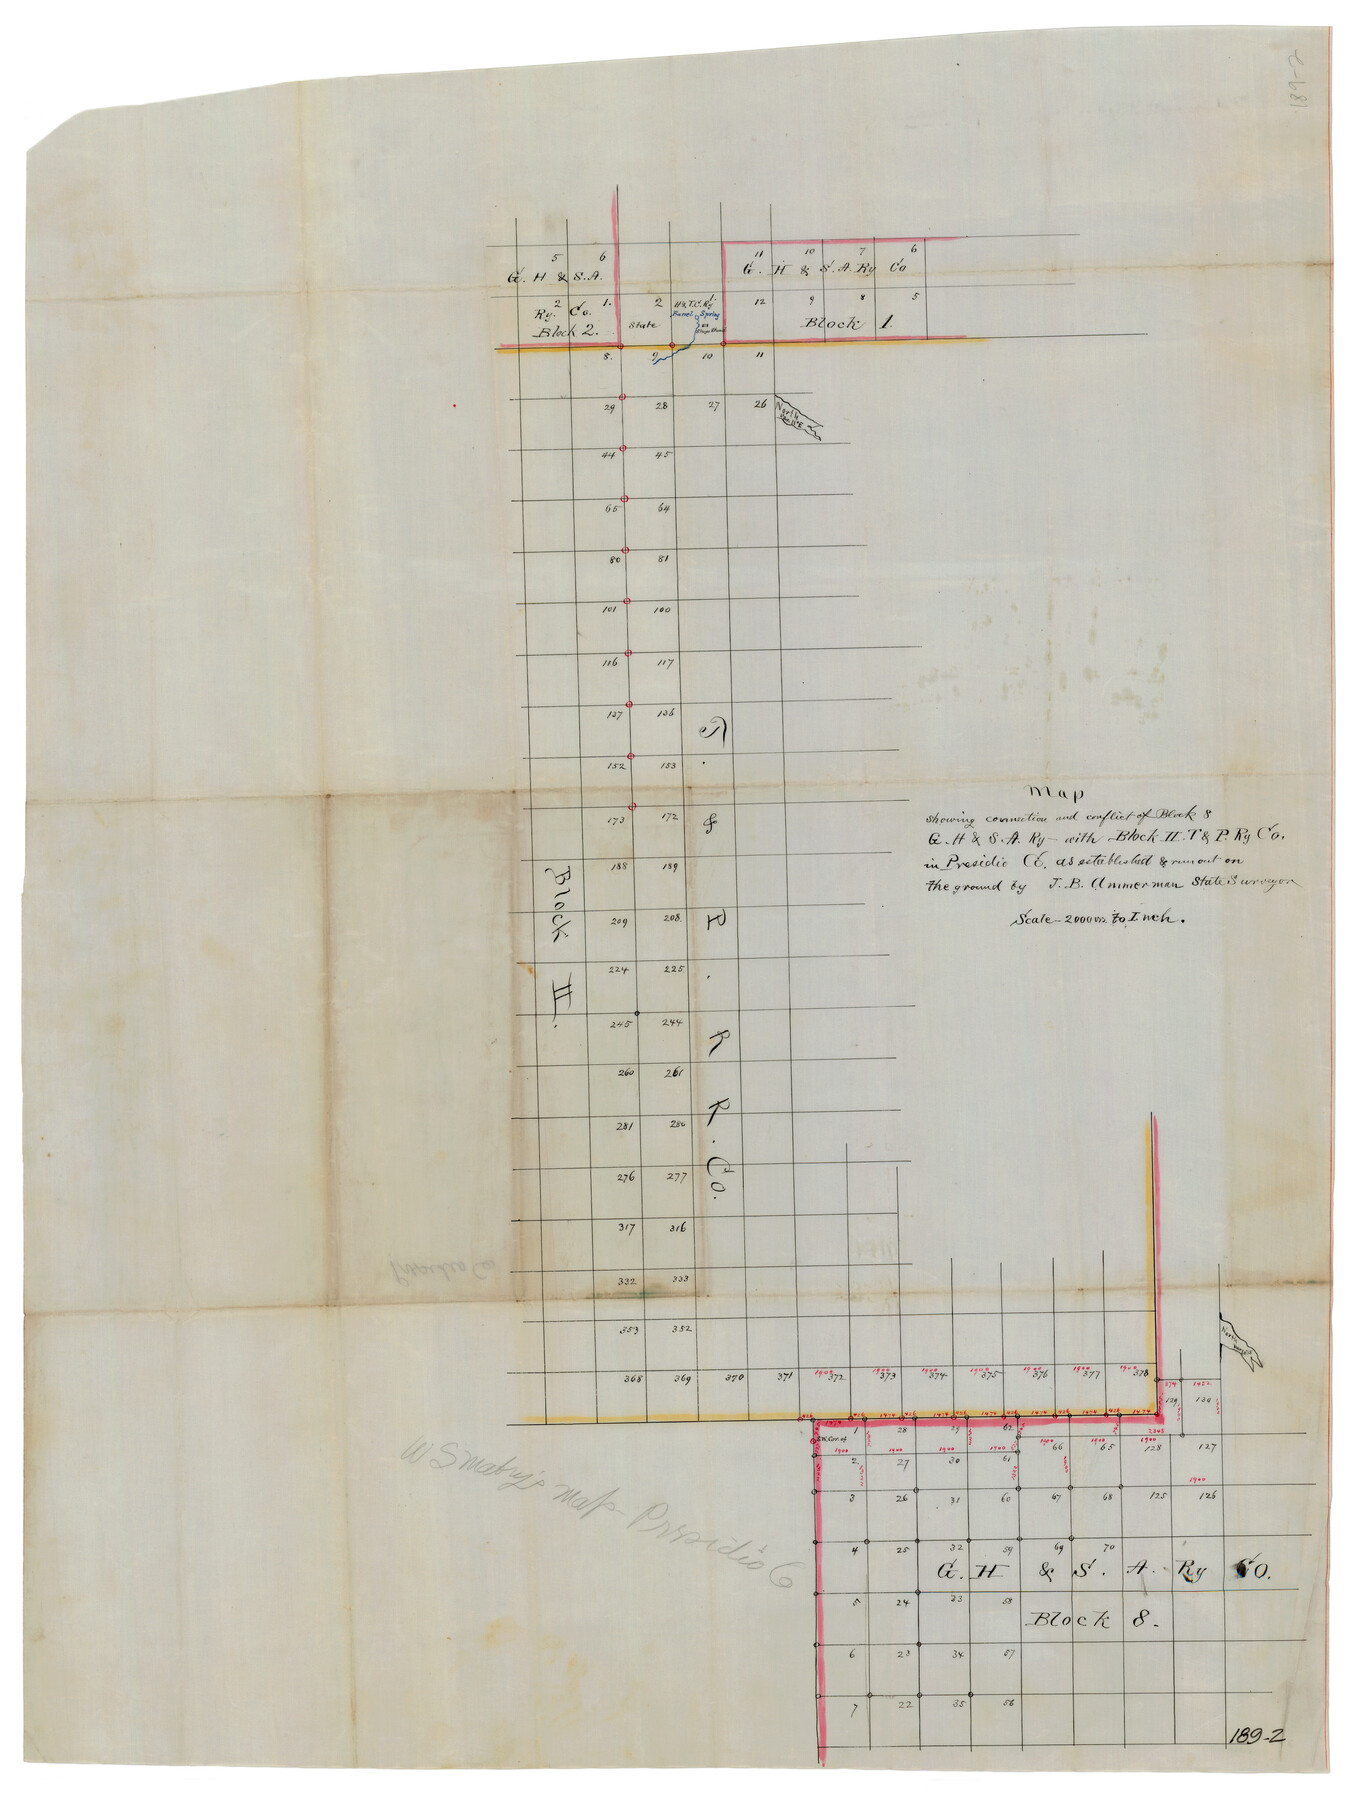 91821, Map showing connection and conflict of Block 8, G. H. & S. A. Ry. with Block II, T. & P. Ry. Co., Twichell Survey Records